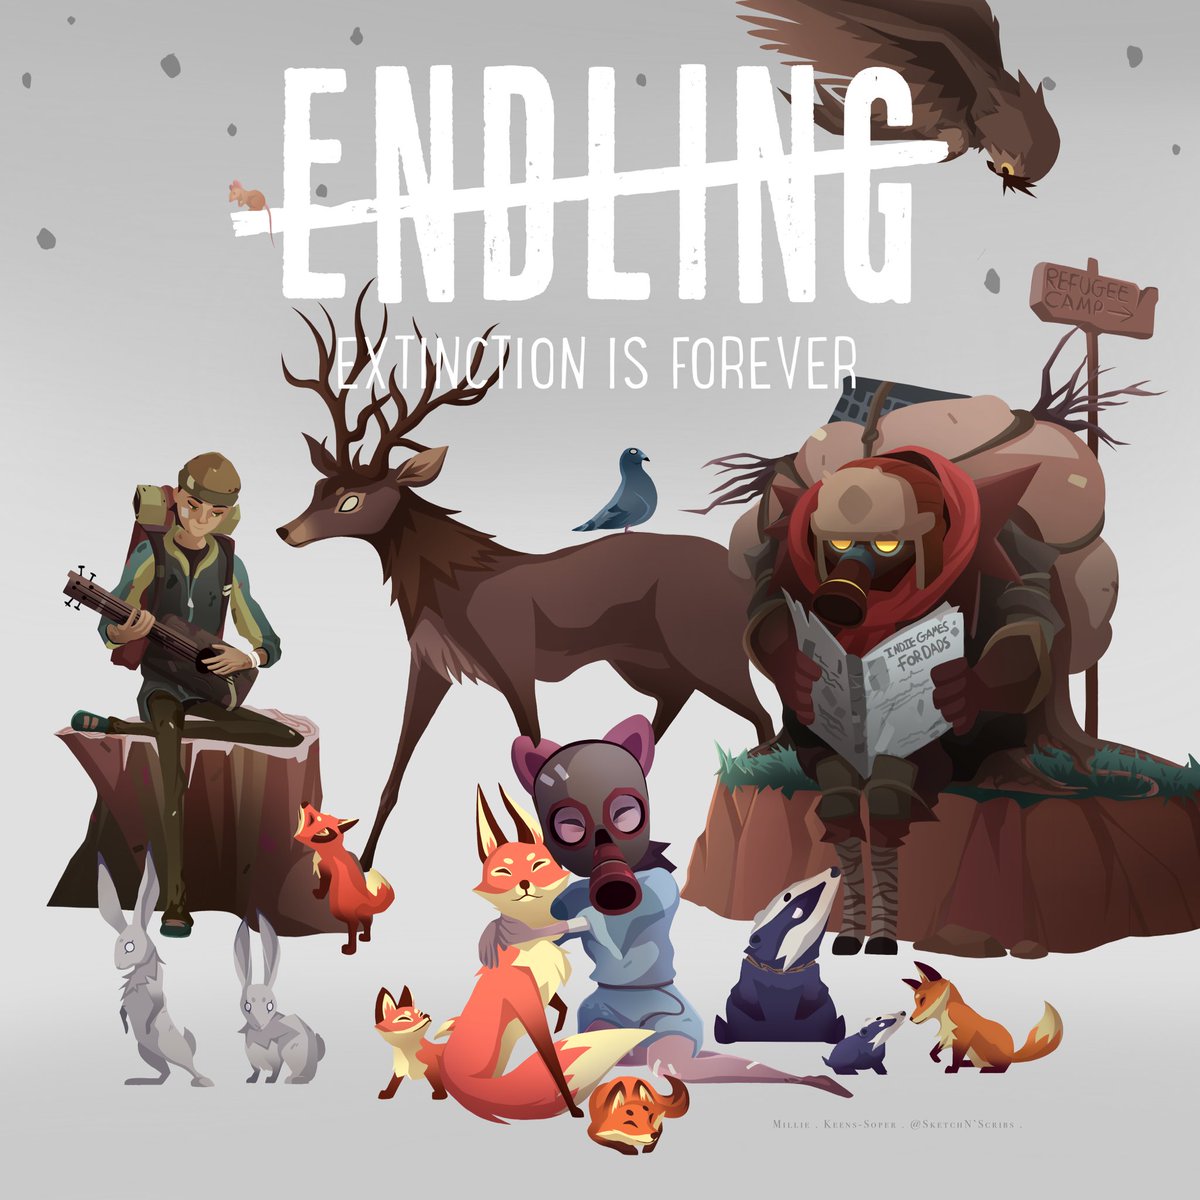 Happy One Year Anniversary to #endling #extinctionisforever 

Support Indie Devs and their projects > @herobeatstudios

Help make the world a better place for all of us #EndlingAnniversary🦊🌿